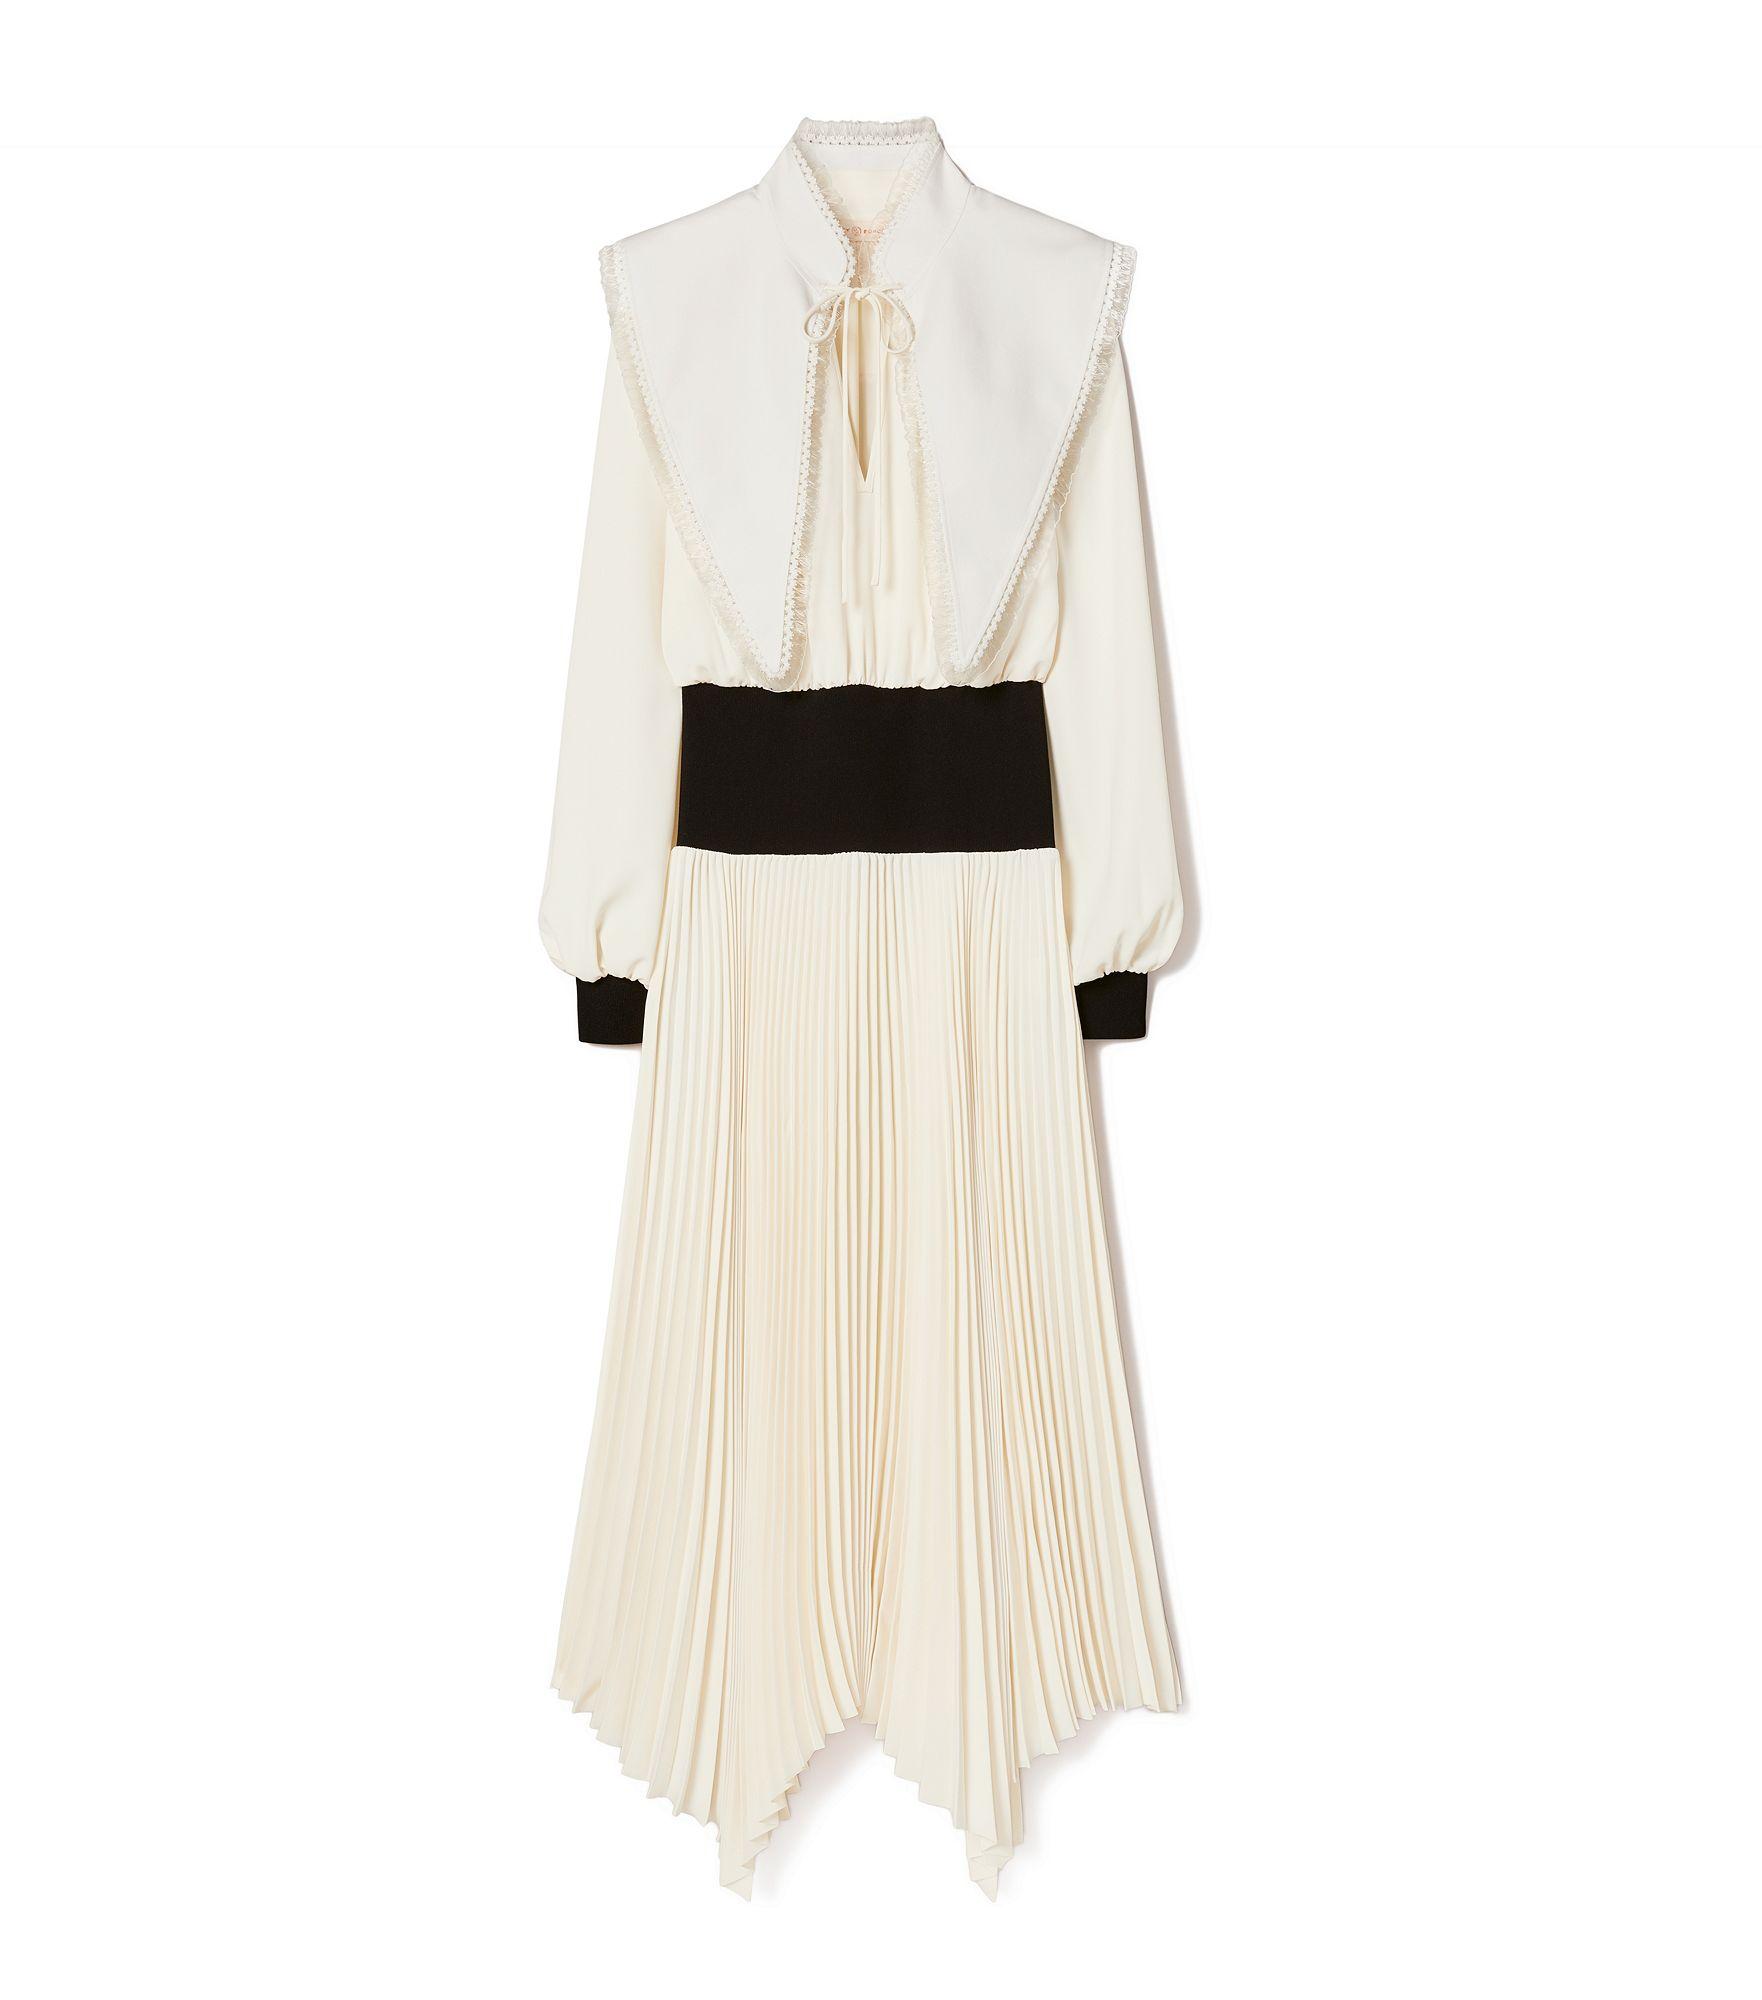 Tory Burch Removable Collar Dress in Natural | Lyst Canada